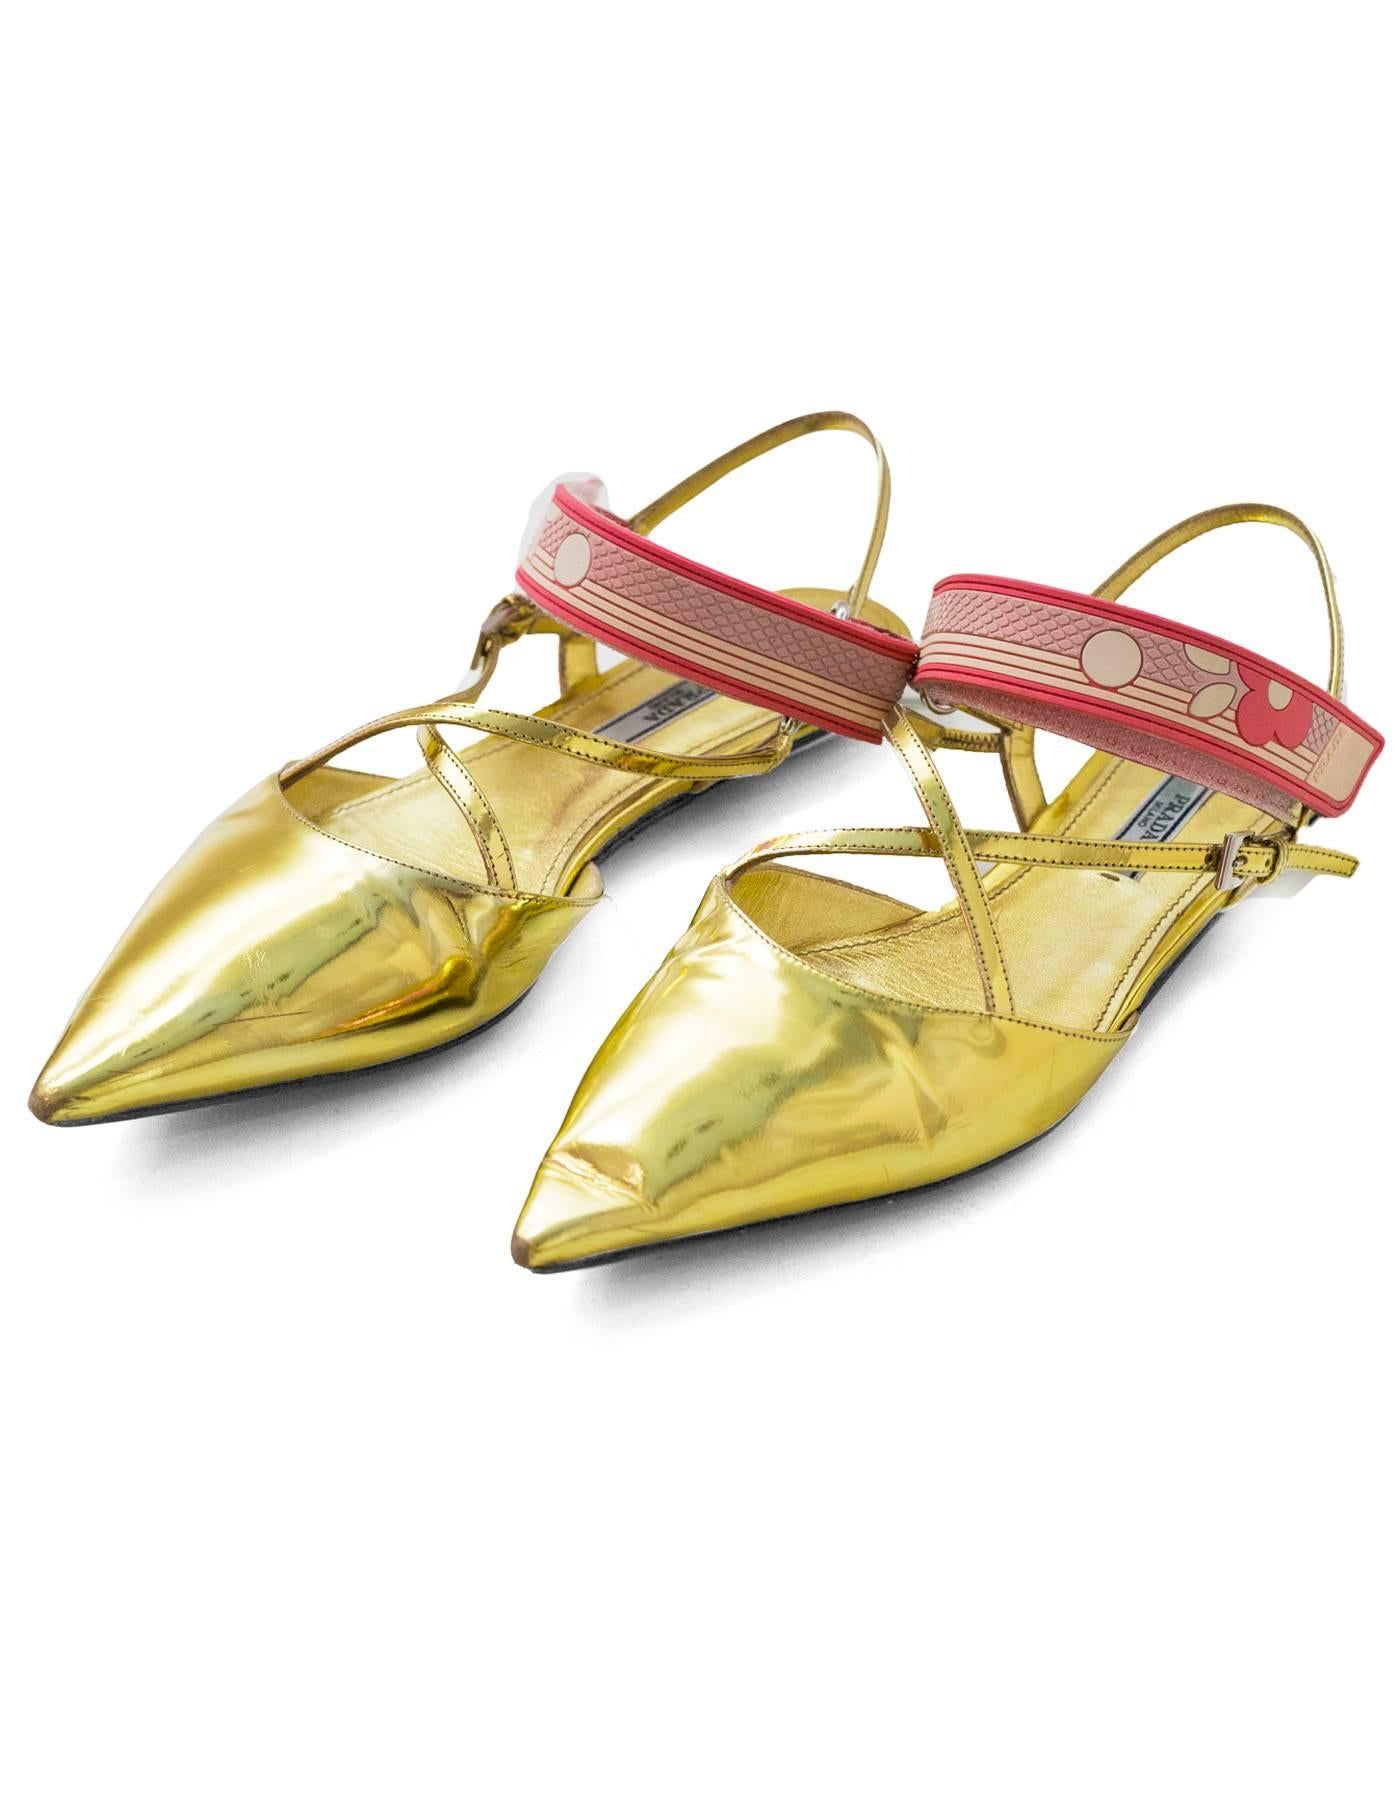 Prada Gold Glazed Leather Flats Sz 38.5

Features pink strap across vamp

Made In: Italy
Color: Gold, pink
Materials: Glazed leather
Closure/Opening: Velcro strap across vamp
Sole Stamp: Prada 38.5 Made in Italy
Overall Condition: Excellent